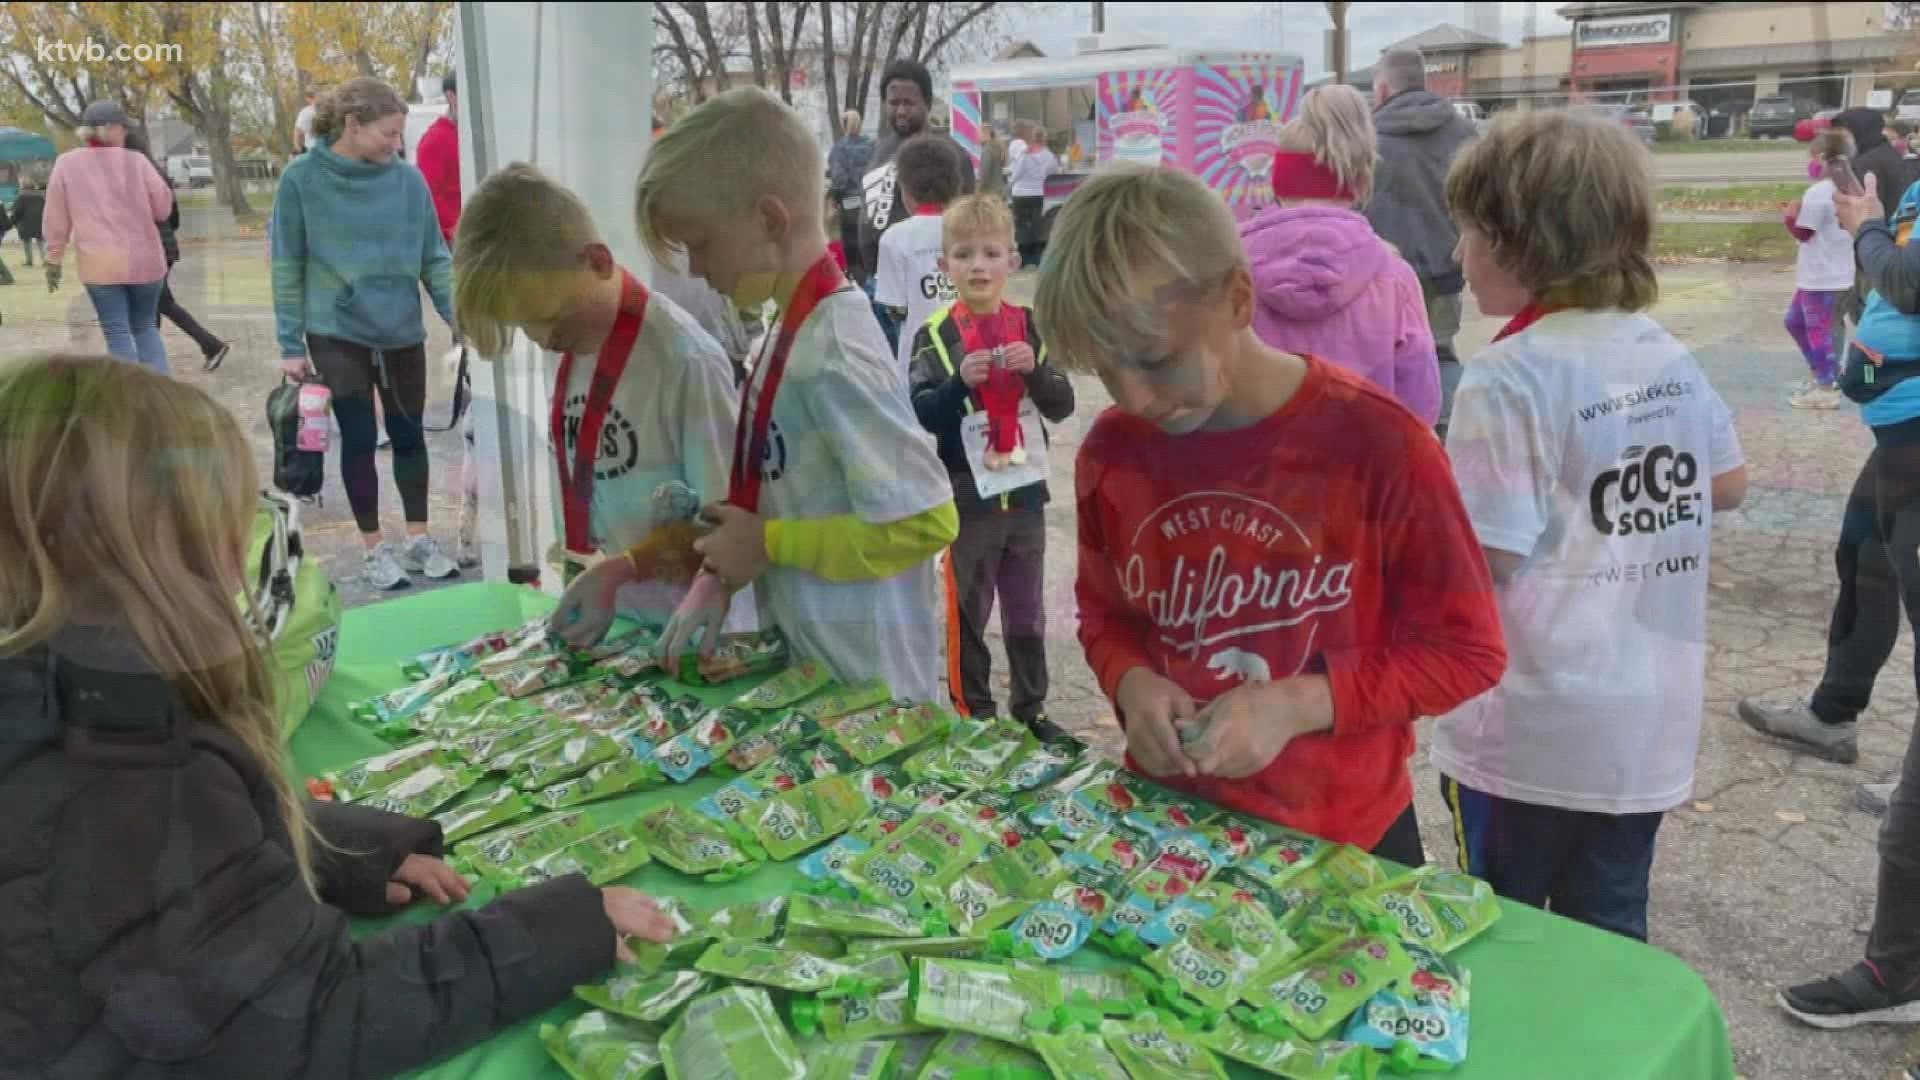 The company says a big part of its mission is providing healthy snacks for families "in all circumstances."